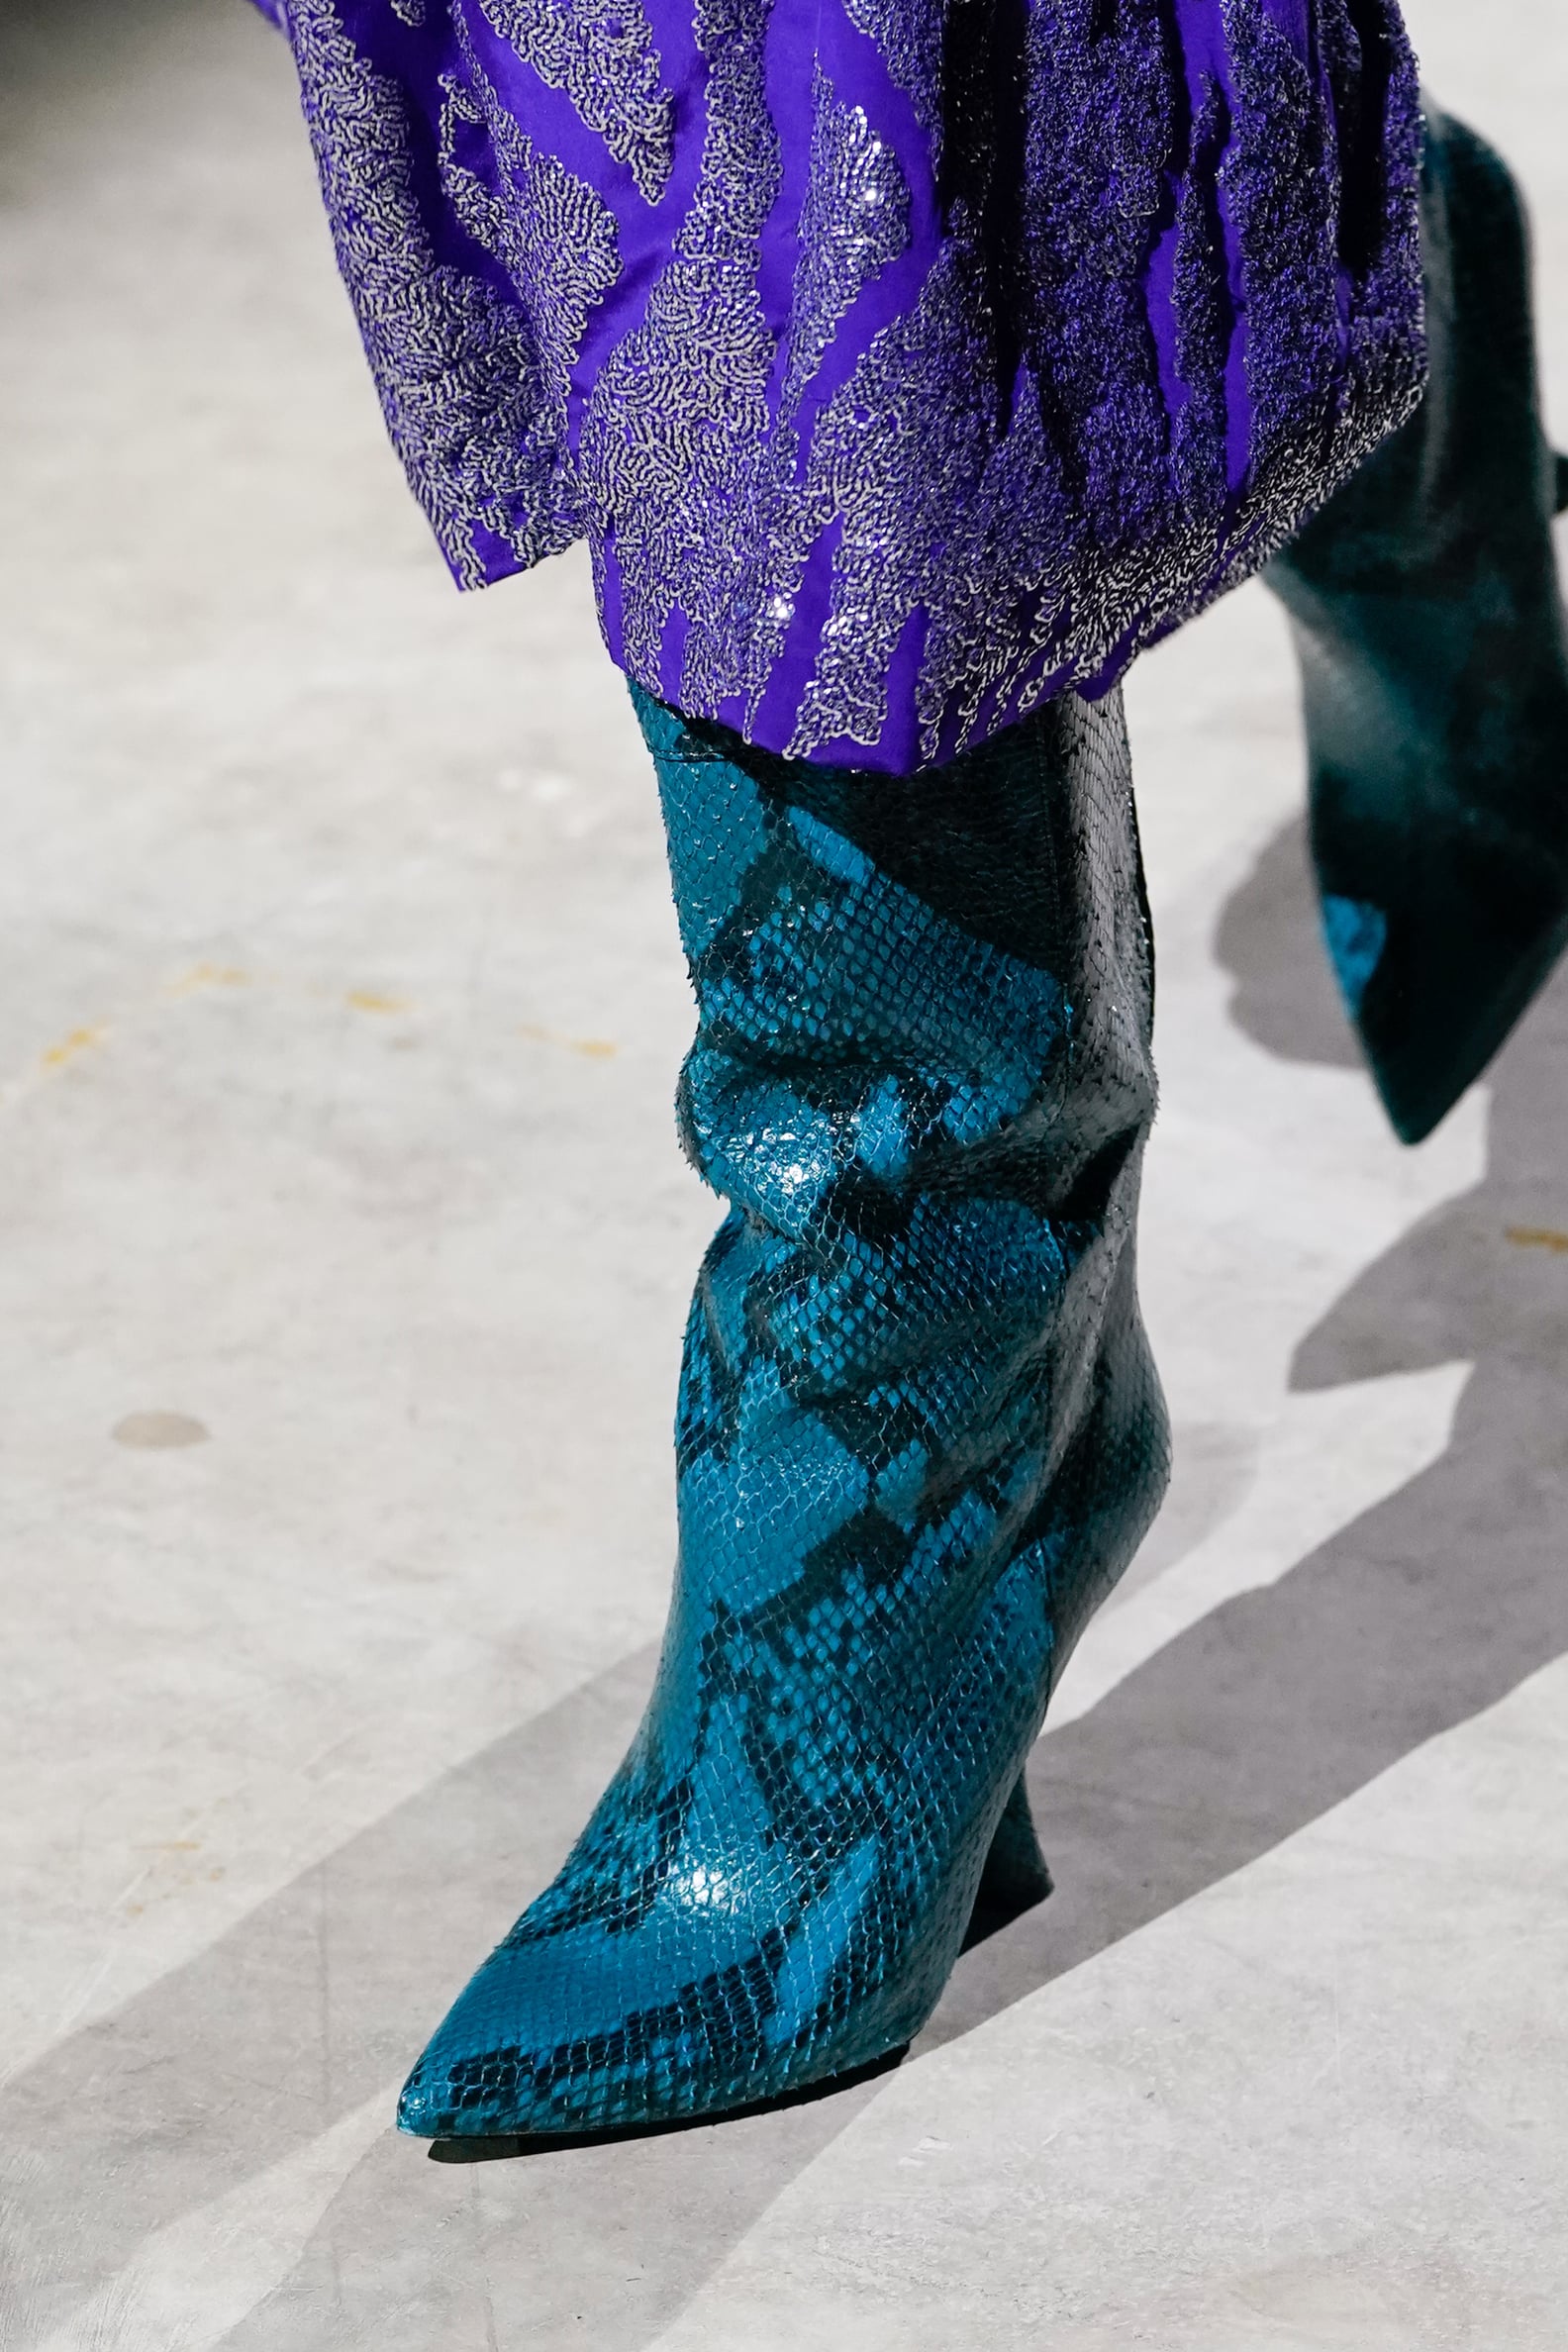 The Best Shoes From Fashion Week Fall 2020 | POPSUGAR Fashion